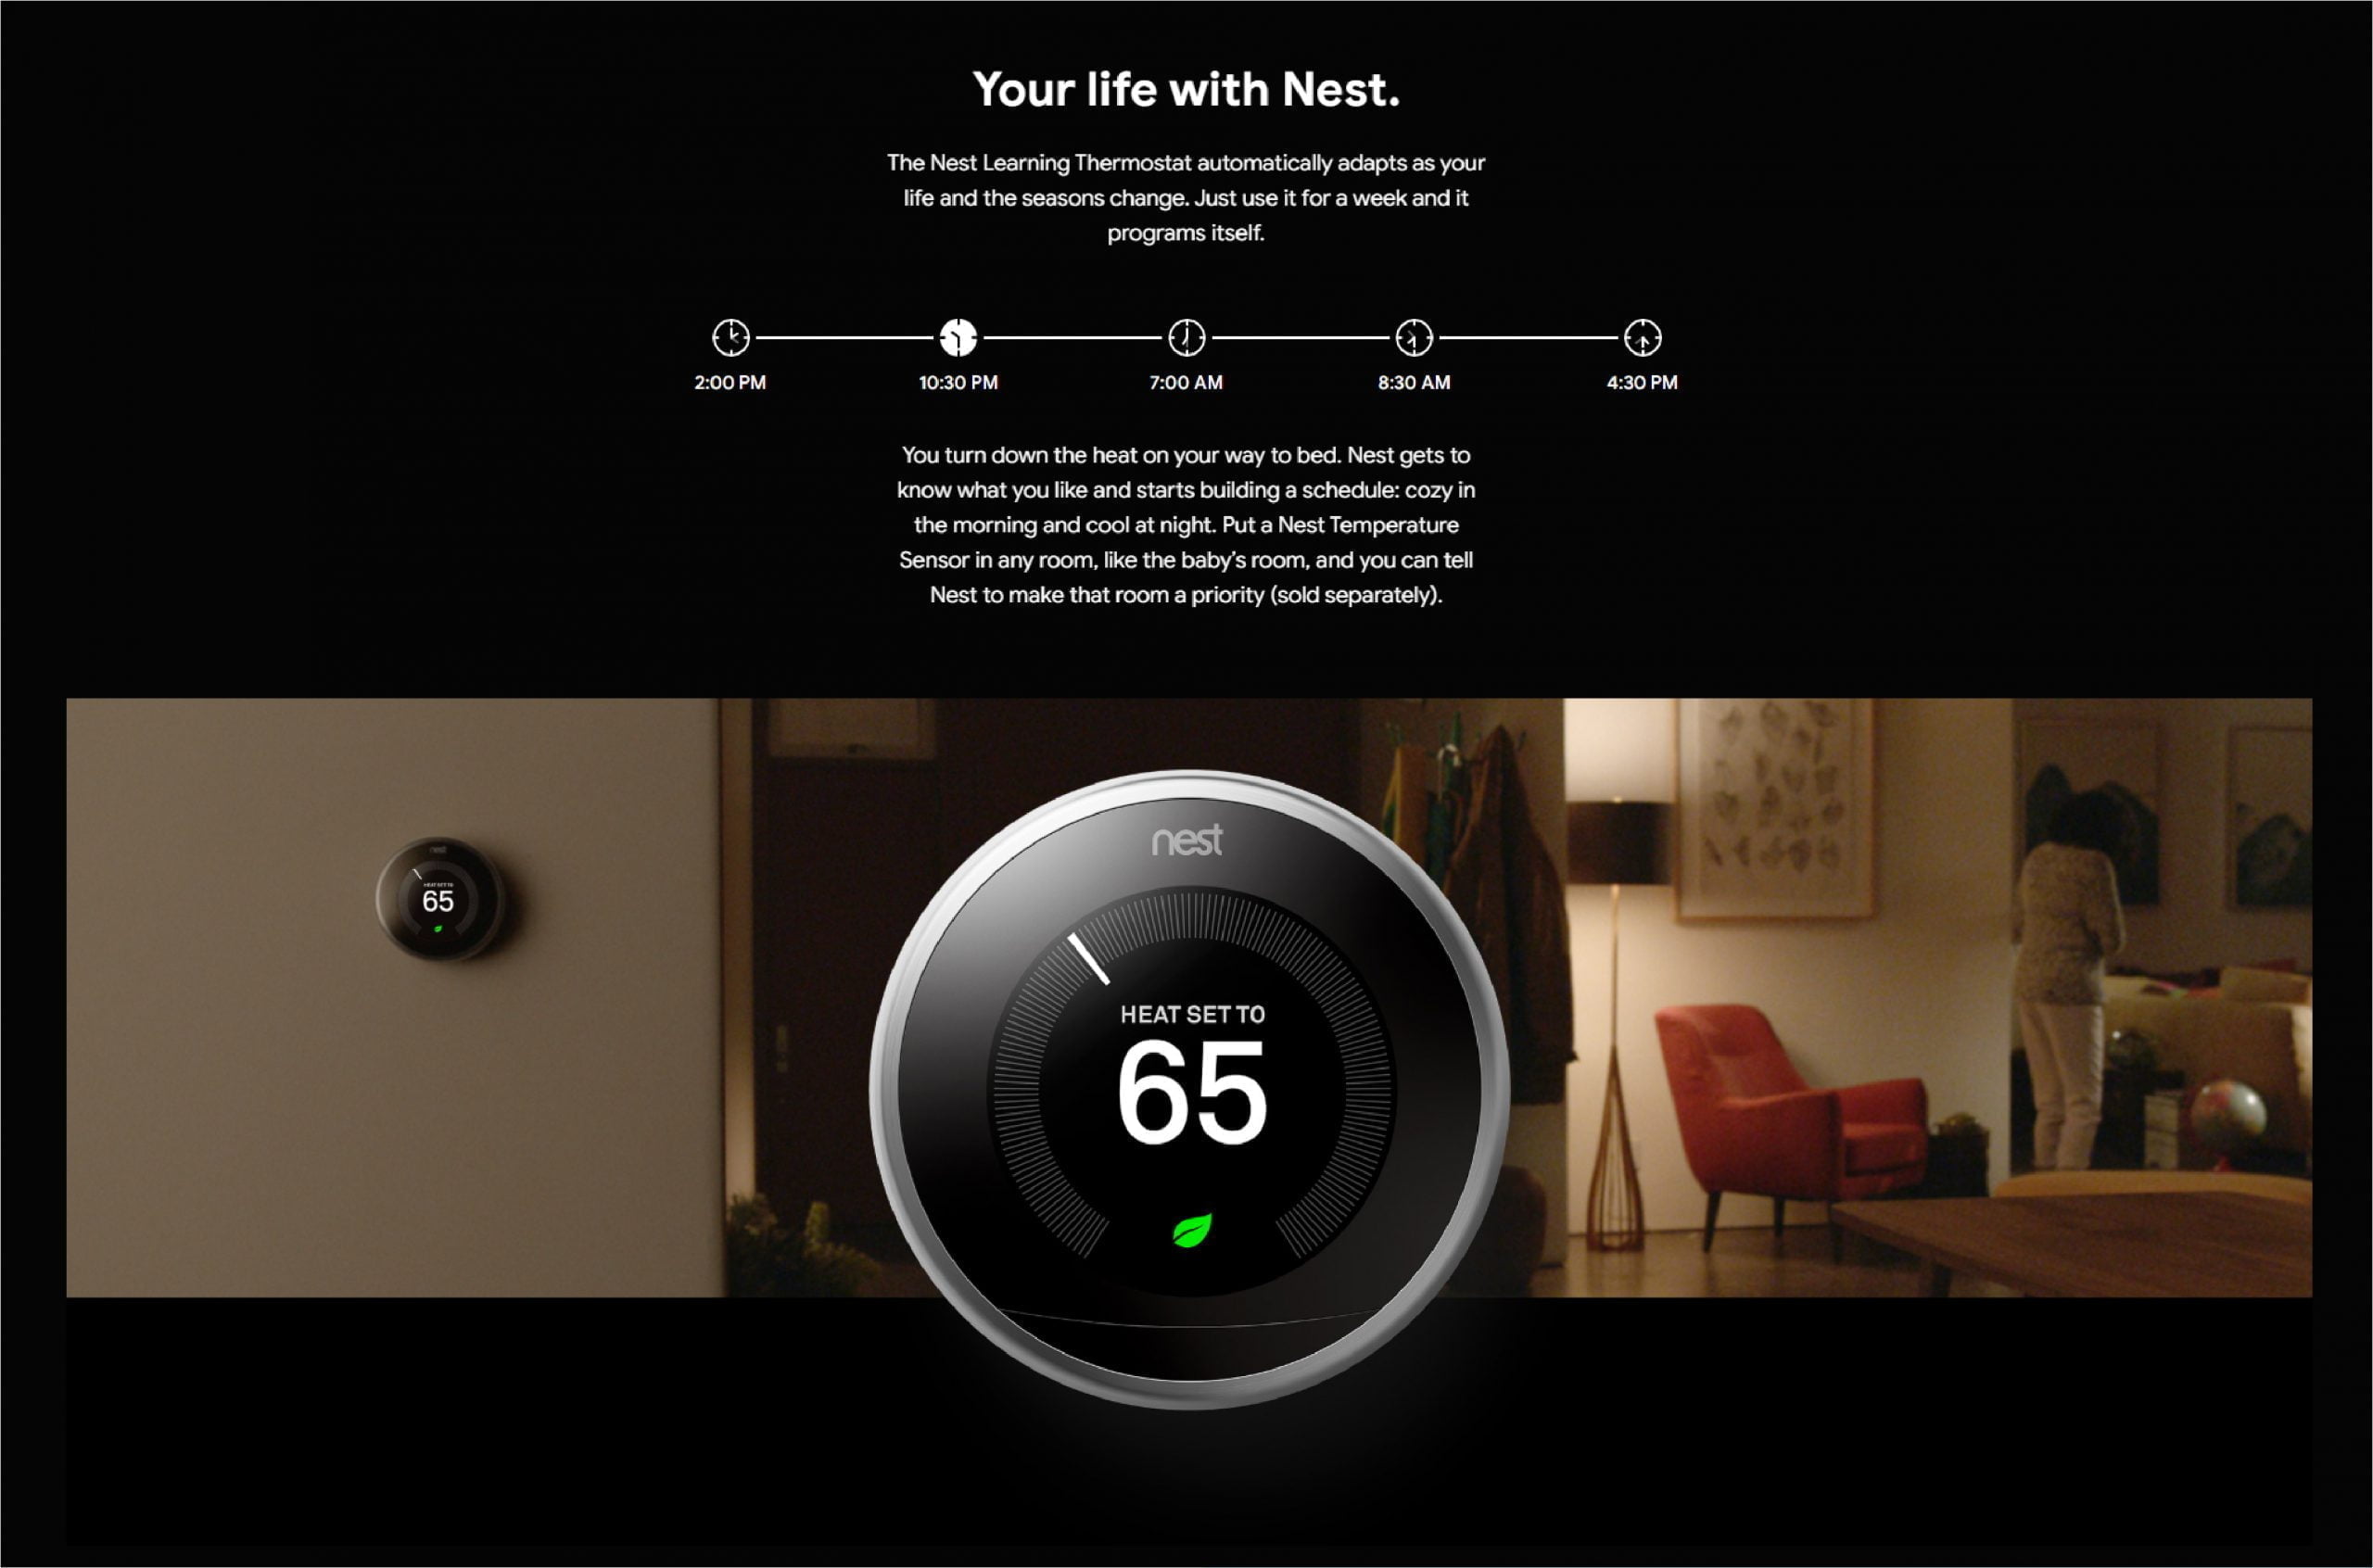 Nest 03 Scaled Google &Lt;H1&Gt;Google Nest Learning Smart Wifi Thermostat 3Rd Gen - T3007Es Stainless Steel&Lt;/H1&Gt; &Lt;Ul Class=&Quot;A-Unordered-List A-Vertical A-Spacing-Mini&Quot;&Gt; &Lt;Li&Gt;&Lt;Span Class=&Quot;A-List-Item&Quot;&Gt;Auto-Schedule: No More Confusing Programming. It Learns The Temperatures You Like And Programs Itself.&Lt;/Span&Gt;&Lt;/Li&Gt; &Lt;Li&Gt;&Lt;Span Class=&Quot;A-List-Item&Quot;&Gt;Wi-Fi Thermostat: Connect The Nest Thermostat To Wi-Fi To Change The Temperature From Your Phone, Tablet Or Laptop.&Lt;/Span&Gt;&Lt;/Li&Gt; &Lt;Li&Gt;&Lt;Span Class=&Quot;A-List-Item&Quot;&Gt;Energy Saving: You’ll See The Nest Leaf When You Choose A Temperature That Saves Energy. It Guides You In The Right Direction.&Lt;/Span&Gt;&Lt;/Li&Gt; &Lt;Li&Gt;&Lt;Span Class=&Quot;A-List-Item&Quot;&Gt;Smart Thermostat: Early-On Nest Learns How Your Home Warms Up And Keeps An Eye On The Weather To Get You The Temperature You Want When You Want It.&Lt;/Span&Gt;&Lt;/Li&Gt; &Lt;Li&Gt;&Lt;Span Class=&Quot;A-List-Item&Quot;&Gt;Home/Away Assist: The Nest Thermostat Automatically Turns Itself Down When You’re Away To Avoid Heating Or Cooling An Empty Home.&Lt;/Span&Gt;&Lt;/Li&Gt; &Lt;Li&Gt;&Lt;Span Class=&Quot;A-List-Item&Quot;&Gt;Works With Amazon Alexa For Voice Control (Alexa Device Sold Separately)&Lt;/Span&Gt;&Lt;/Li&Gt; &Lt;Li&Gt;&Lt;Span Class=&Quot;A-List-Item&Quot;&Gt;Auto-Schedule: Nest Learns The Temperatures You Like And Programs Itself In About A Week.&Lt;/Span&Gt; &Lt;H5&Gt;Note : Direct Replacement Warranty One Year&Lt;/H5&Gt; &Lt;Div Class=&Quot;Html-Fragment&Quot;&Gt; &Lt;Div&Gt; &Lt;B&Gt;We Also Provide International Wholesale And Retail Shipping To All Gcc Countries: Saudi Arabia, Qatar, Oman, Kuwait, Bahrain.&Lt;/B&Gt; &Lt;/Div&Gt; &Lt;/Div&Gt;&Lt;/Li&Gt; &Lt;/Ul&Gt; &Lt;Div Class=&Quot;A-Row A-Expander-Container A-Expander-Inline-Container&Quot; Aria-Live=&Quot;Polite&Quot;&Gt; &Lt;Div Class=&Quot;A-Expander-Content A-Expander-Extend-Content A-Expander-Content-Expanded&Quot; Aria-Expanded=&Quot;True&Quot;&Gt;&Lt;/Div&Gt; &Nbsp; &Lt;/Div&Gt; Thermostat Google Nest Learning Smart Wifi Thermostat 3Rd Gen - T3007Es Stainless Steel